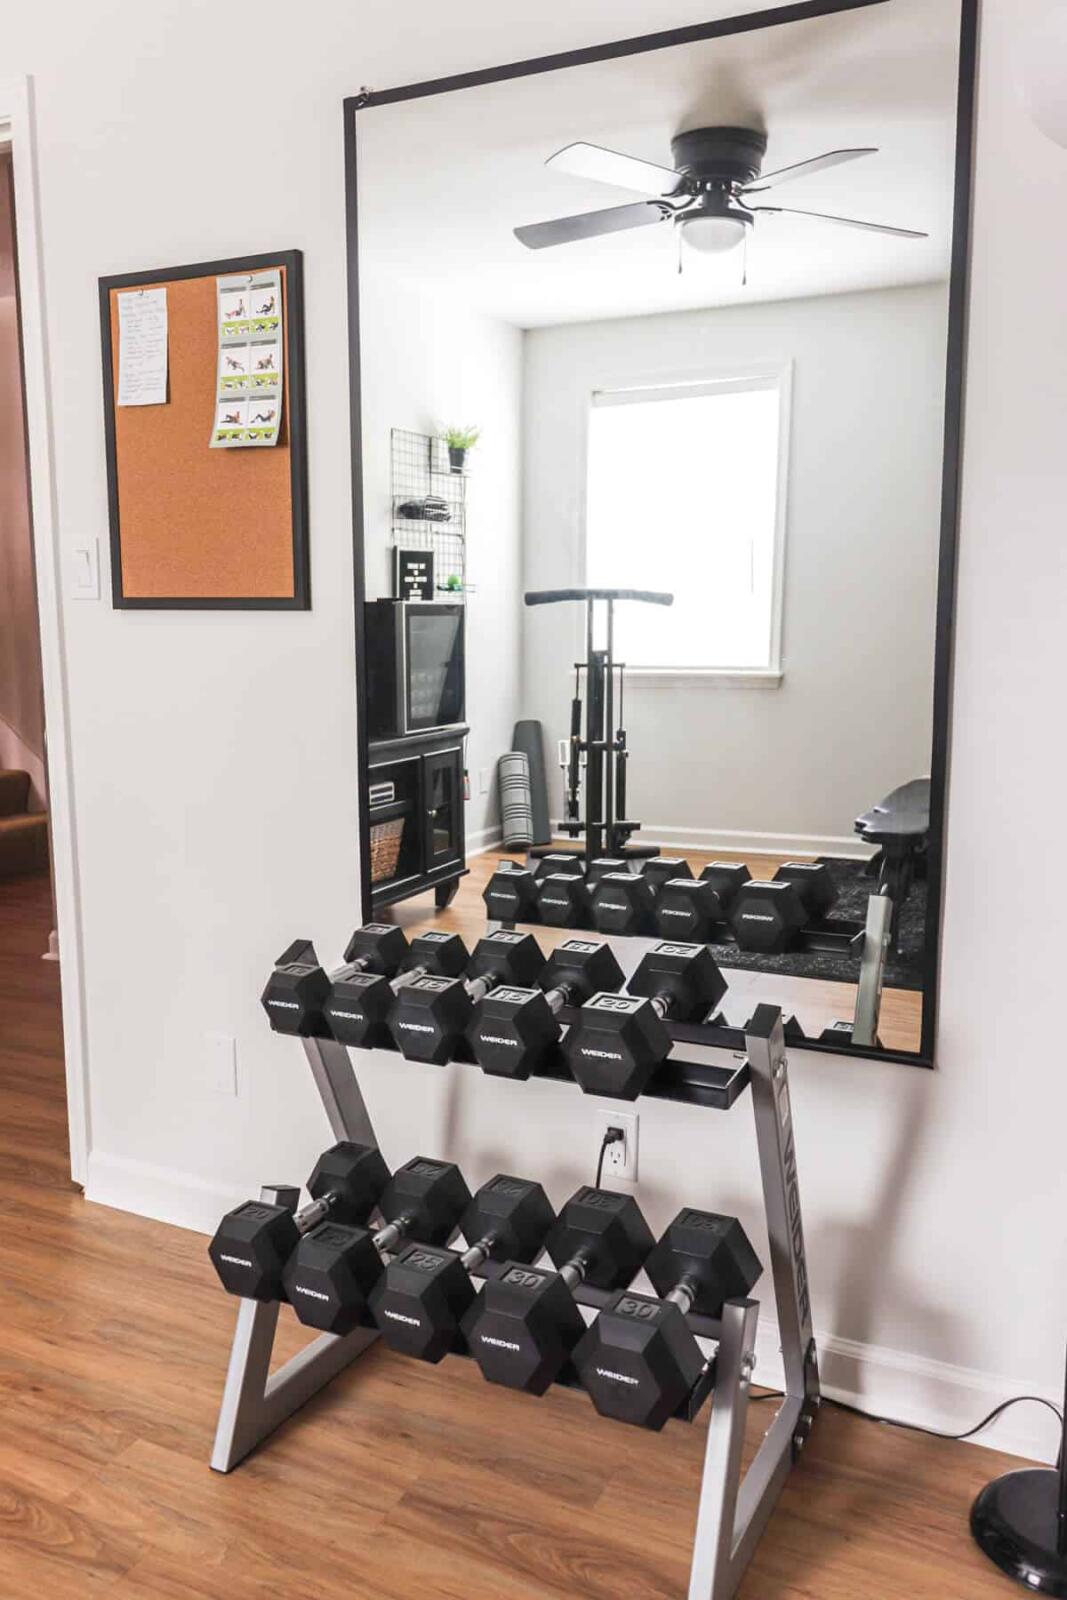 Home gym with dumbbells and exercise equipment.